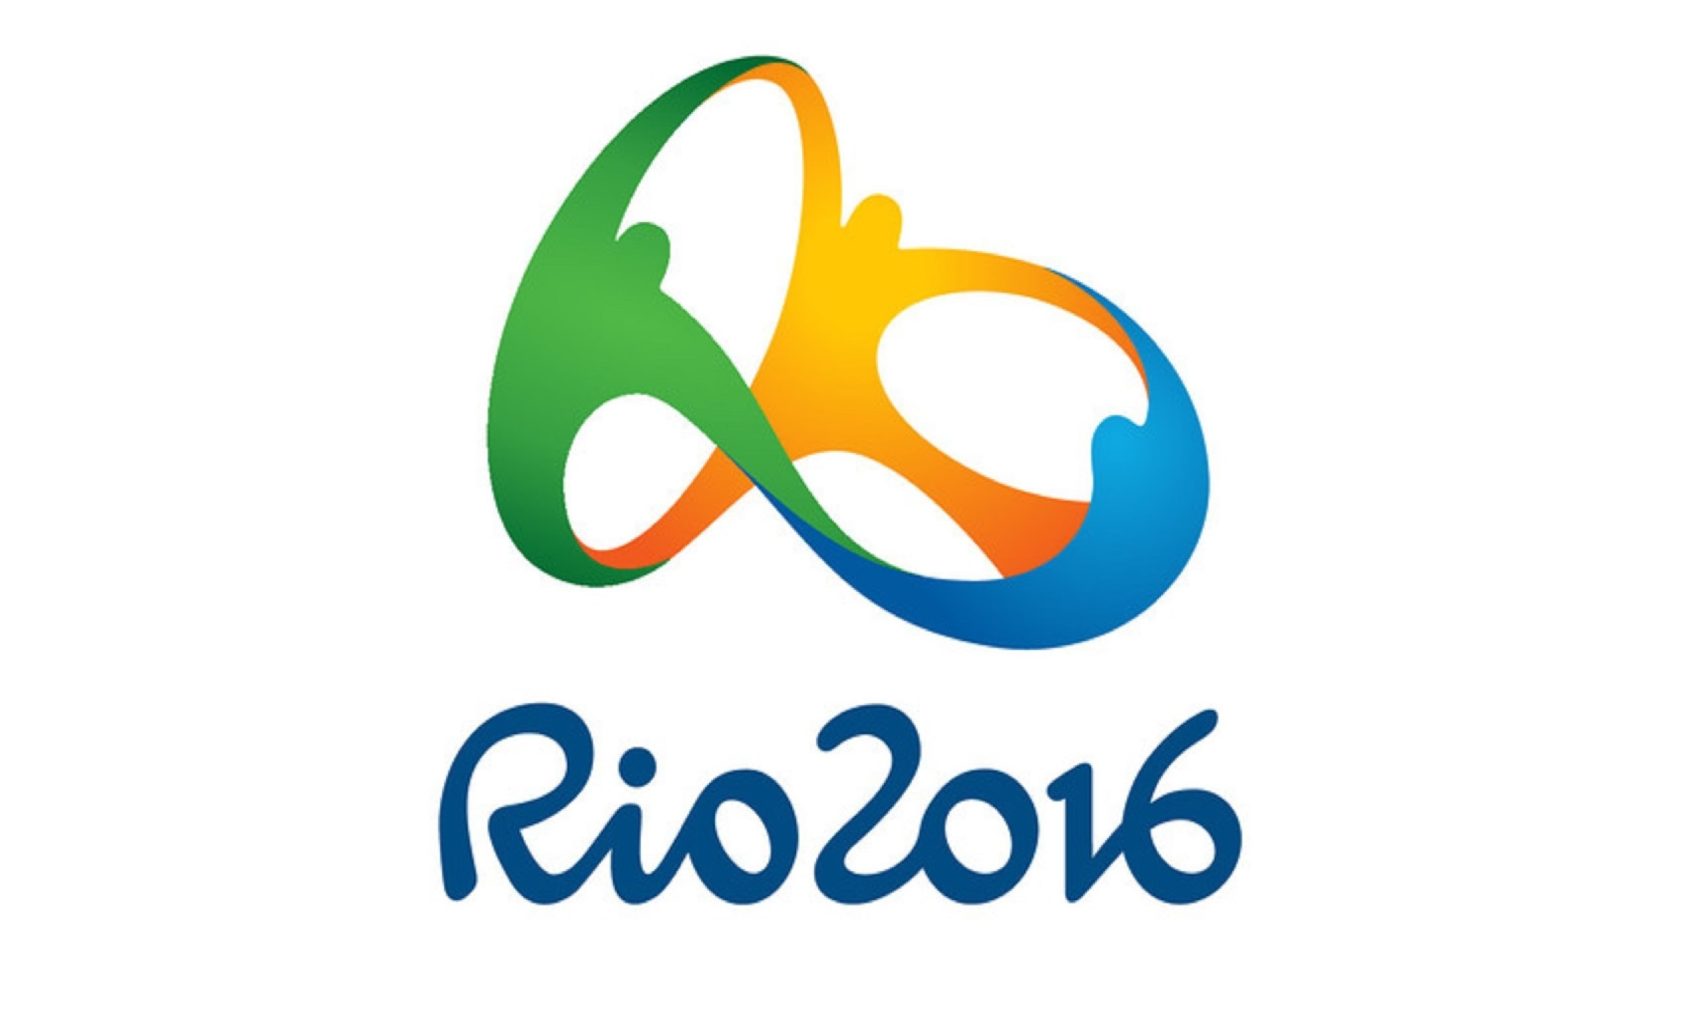 Olympic Medal Standings: Rio 2016